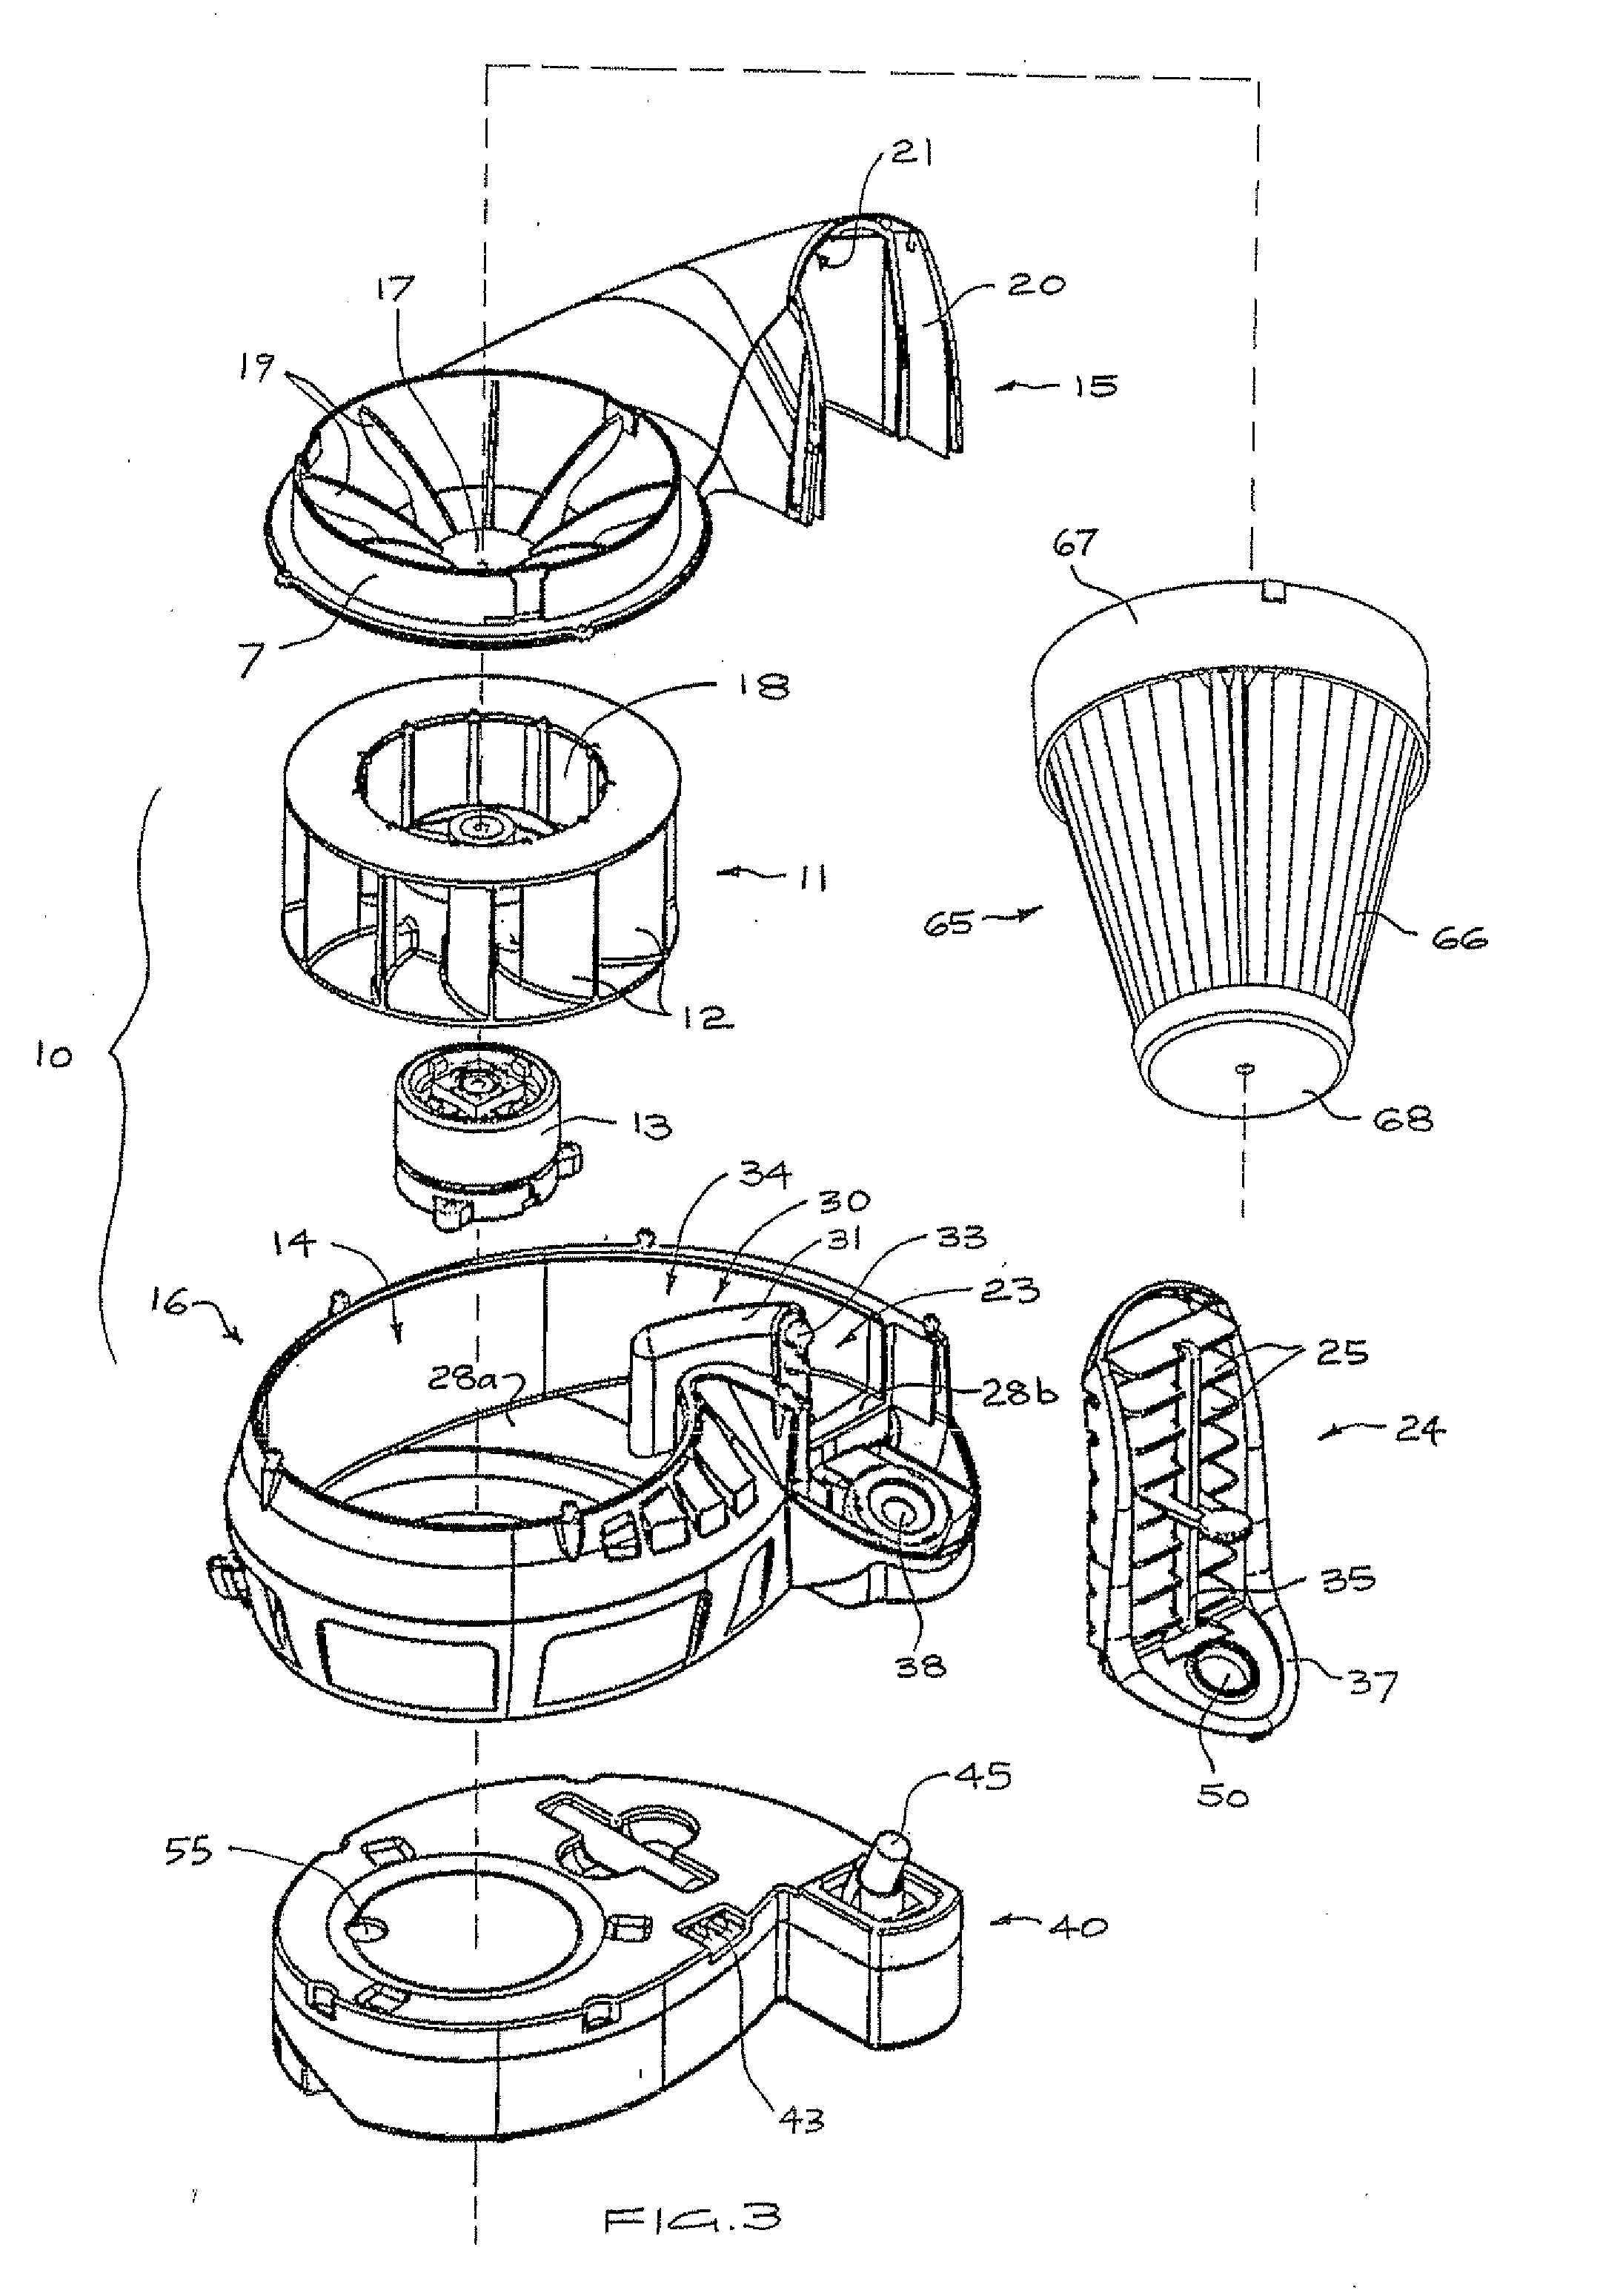 Personal air conditioning apparatus